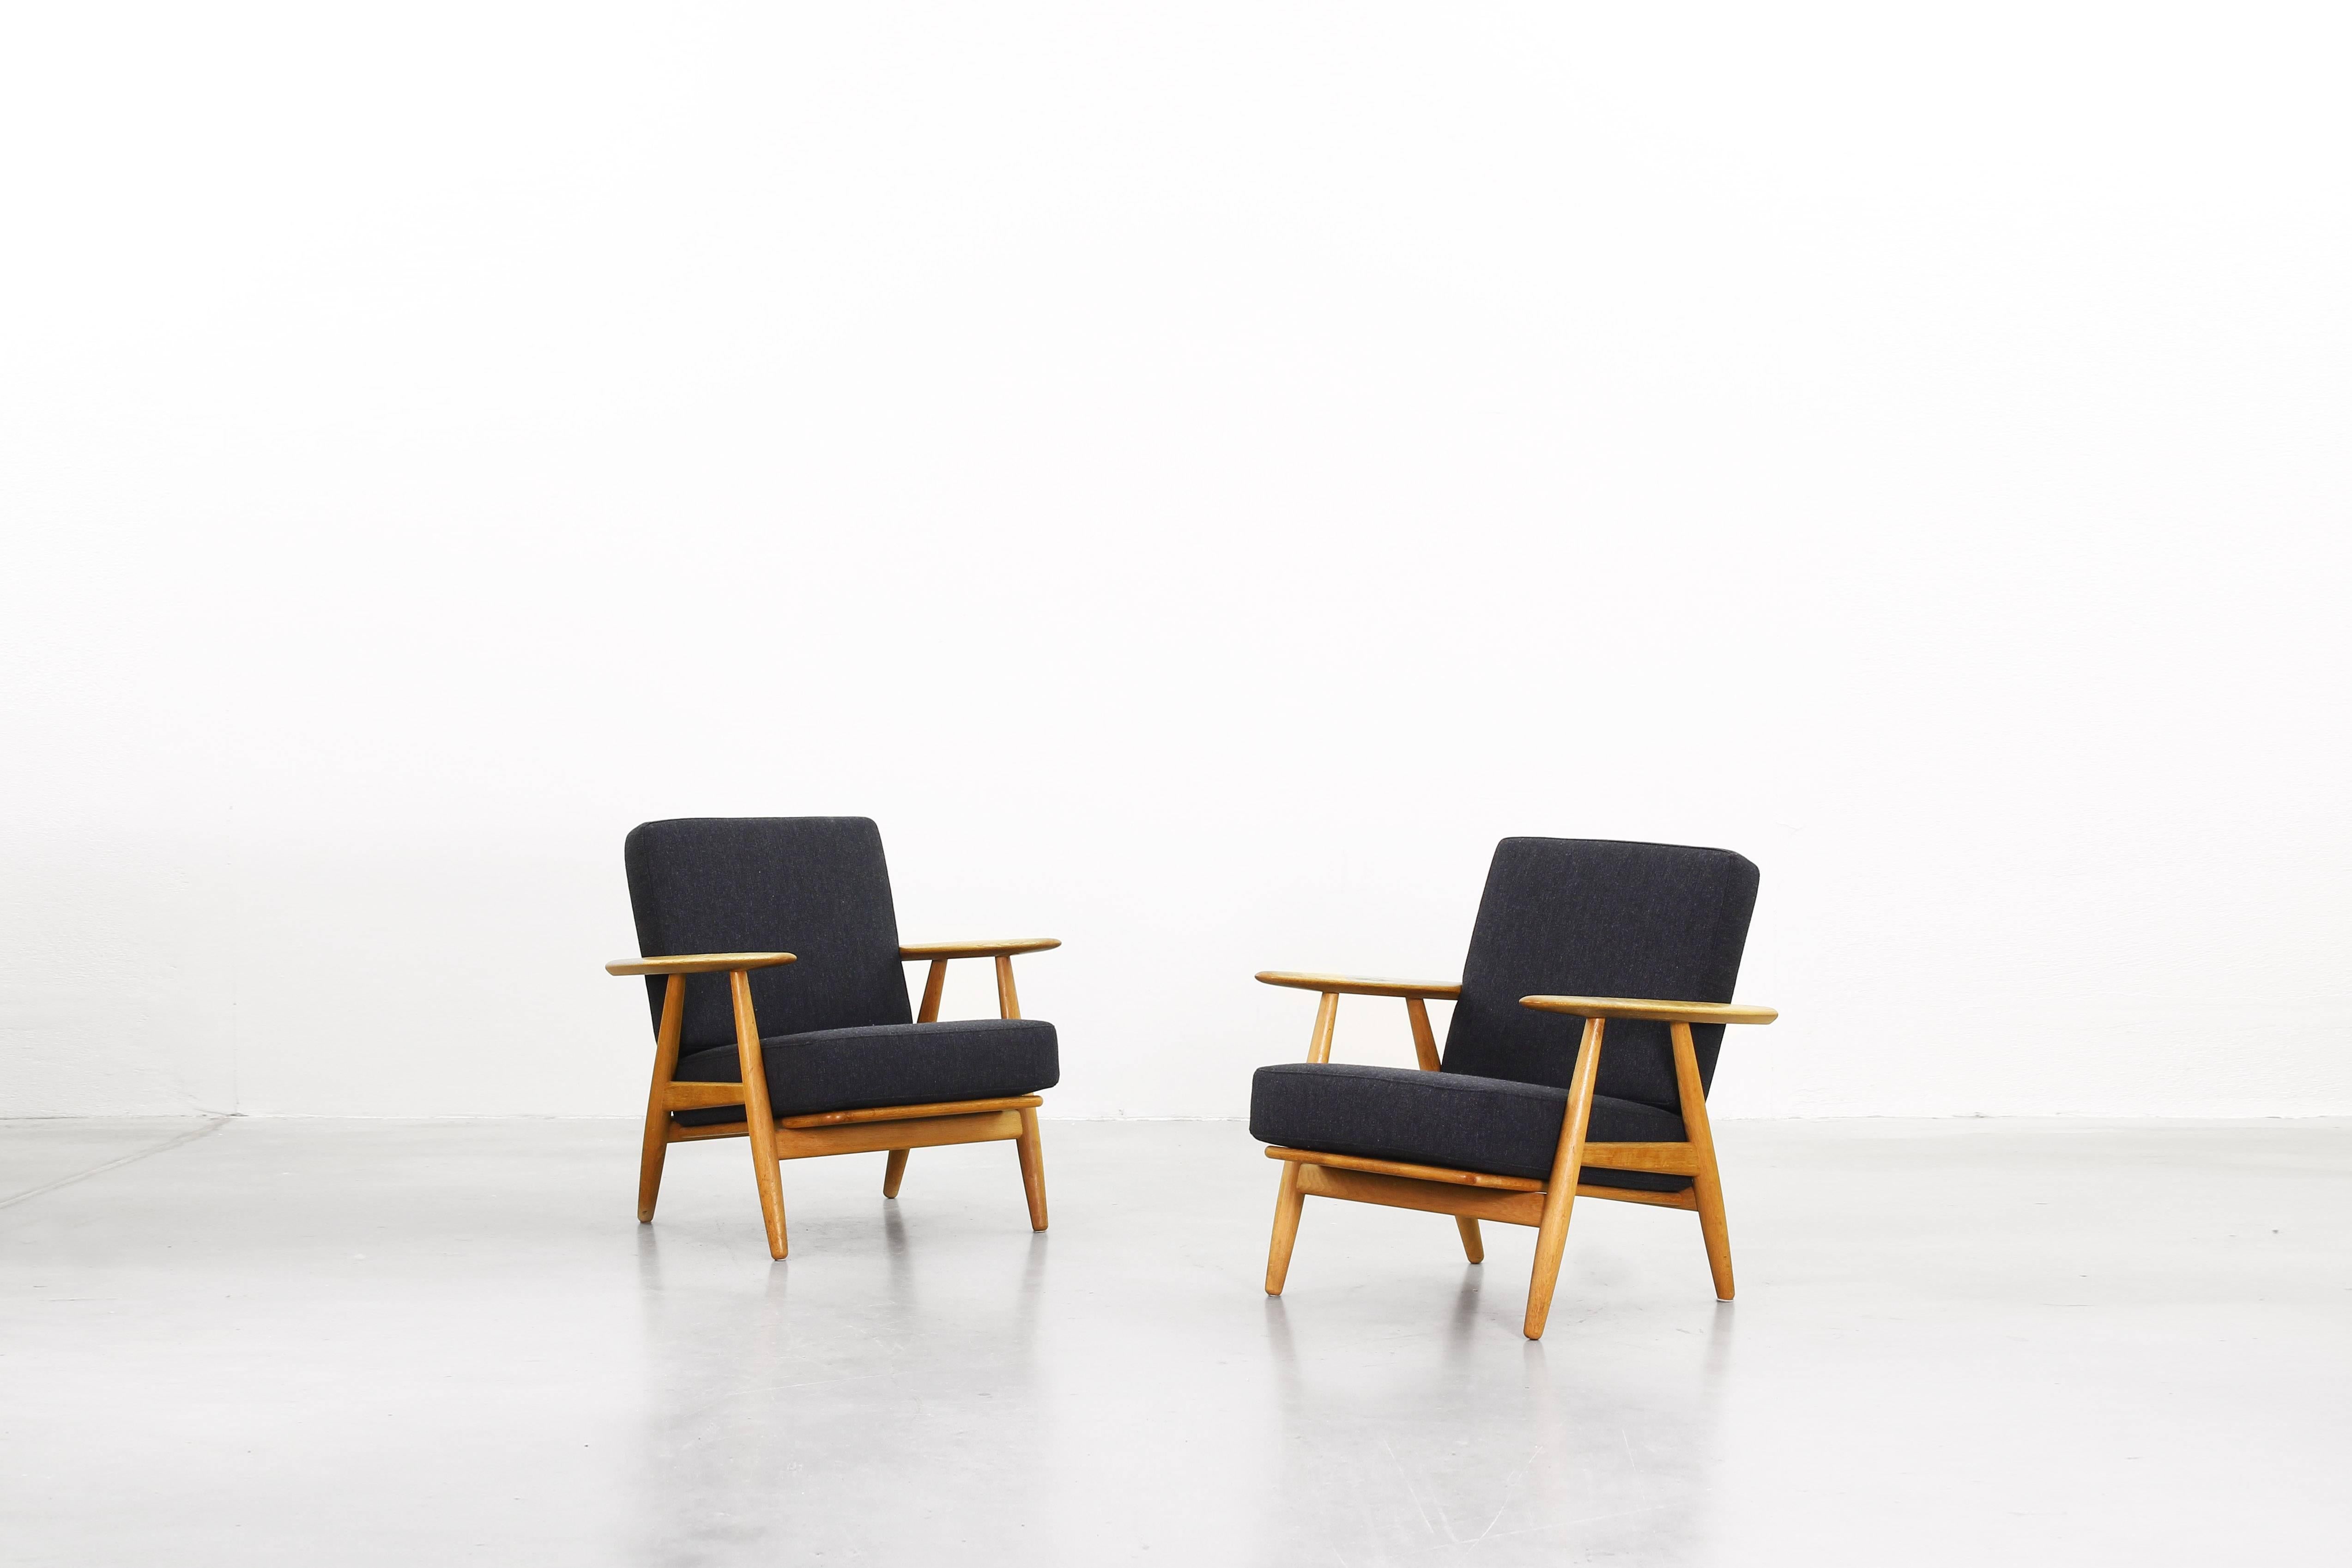 Very beautiful pair of lounge chairs Model 240 designed by Hans J. Wegner and produced by Getama in Denmark in the 1960s.
The chairs are in an excellent condition with a great patinated oak wood frame. The cushions were newly reupholstered with a